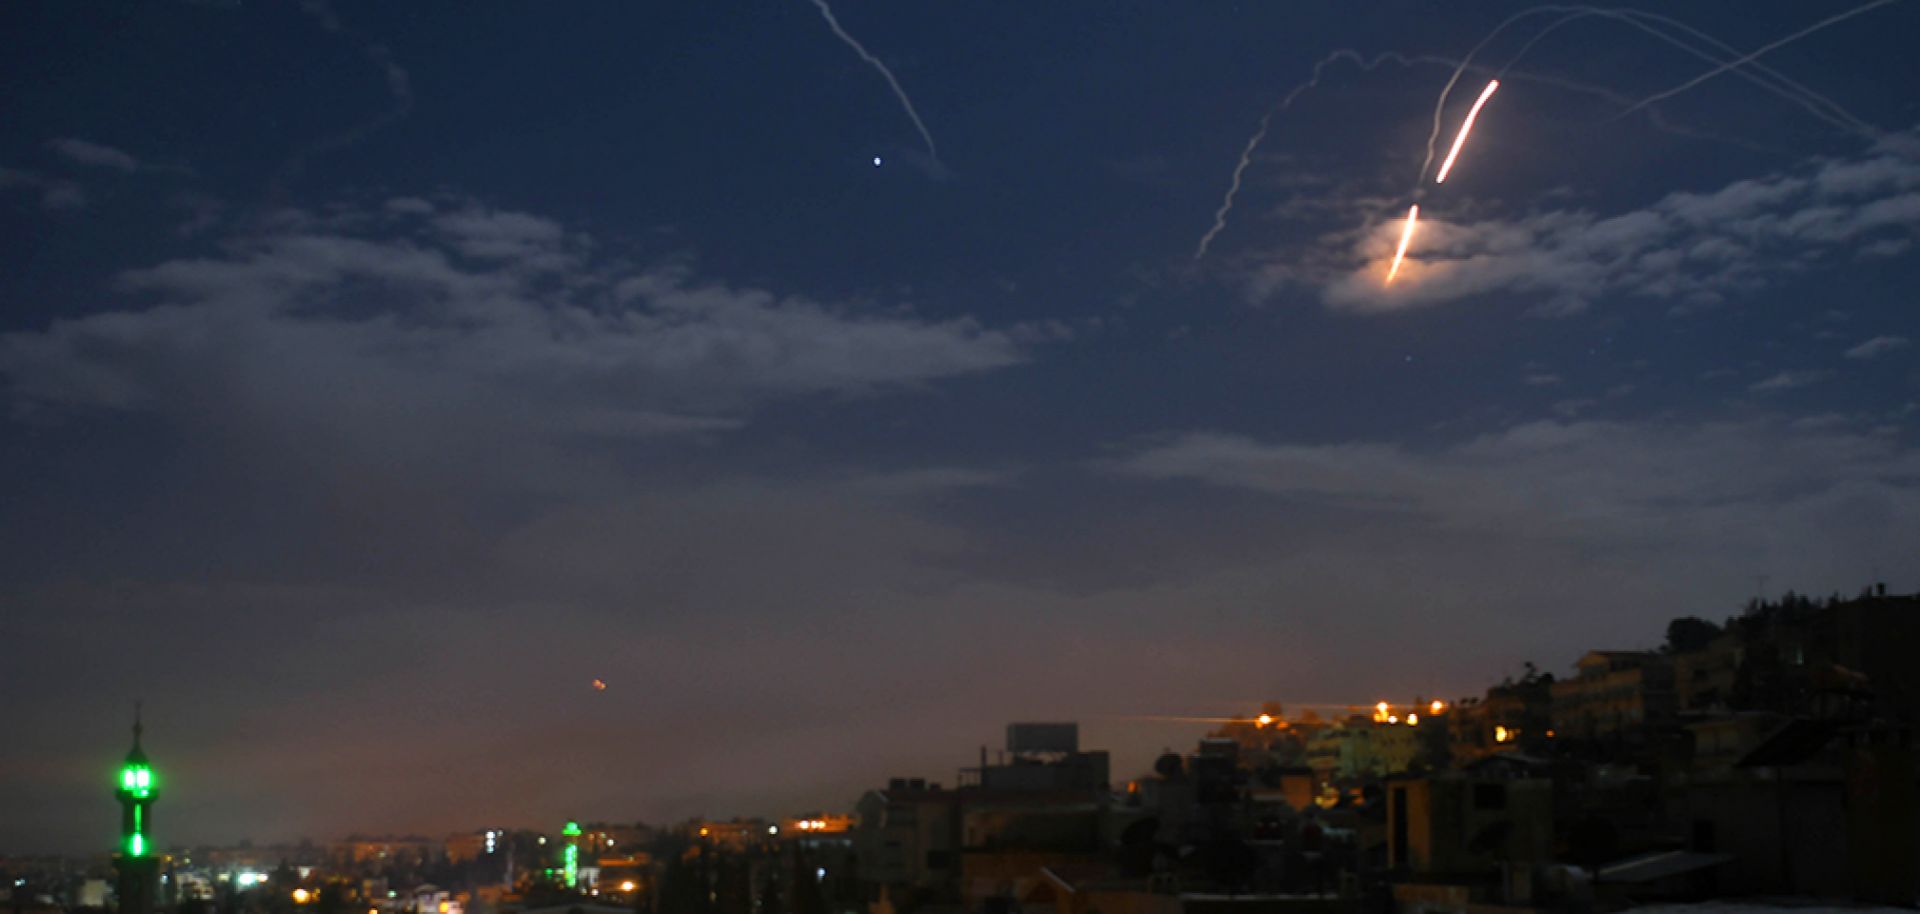 Syrian air defense batteries respond to suspected Israeli missiles targeting Damascus on Jan. 21, 2019.